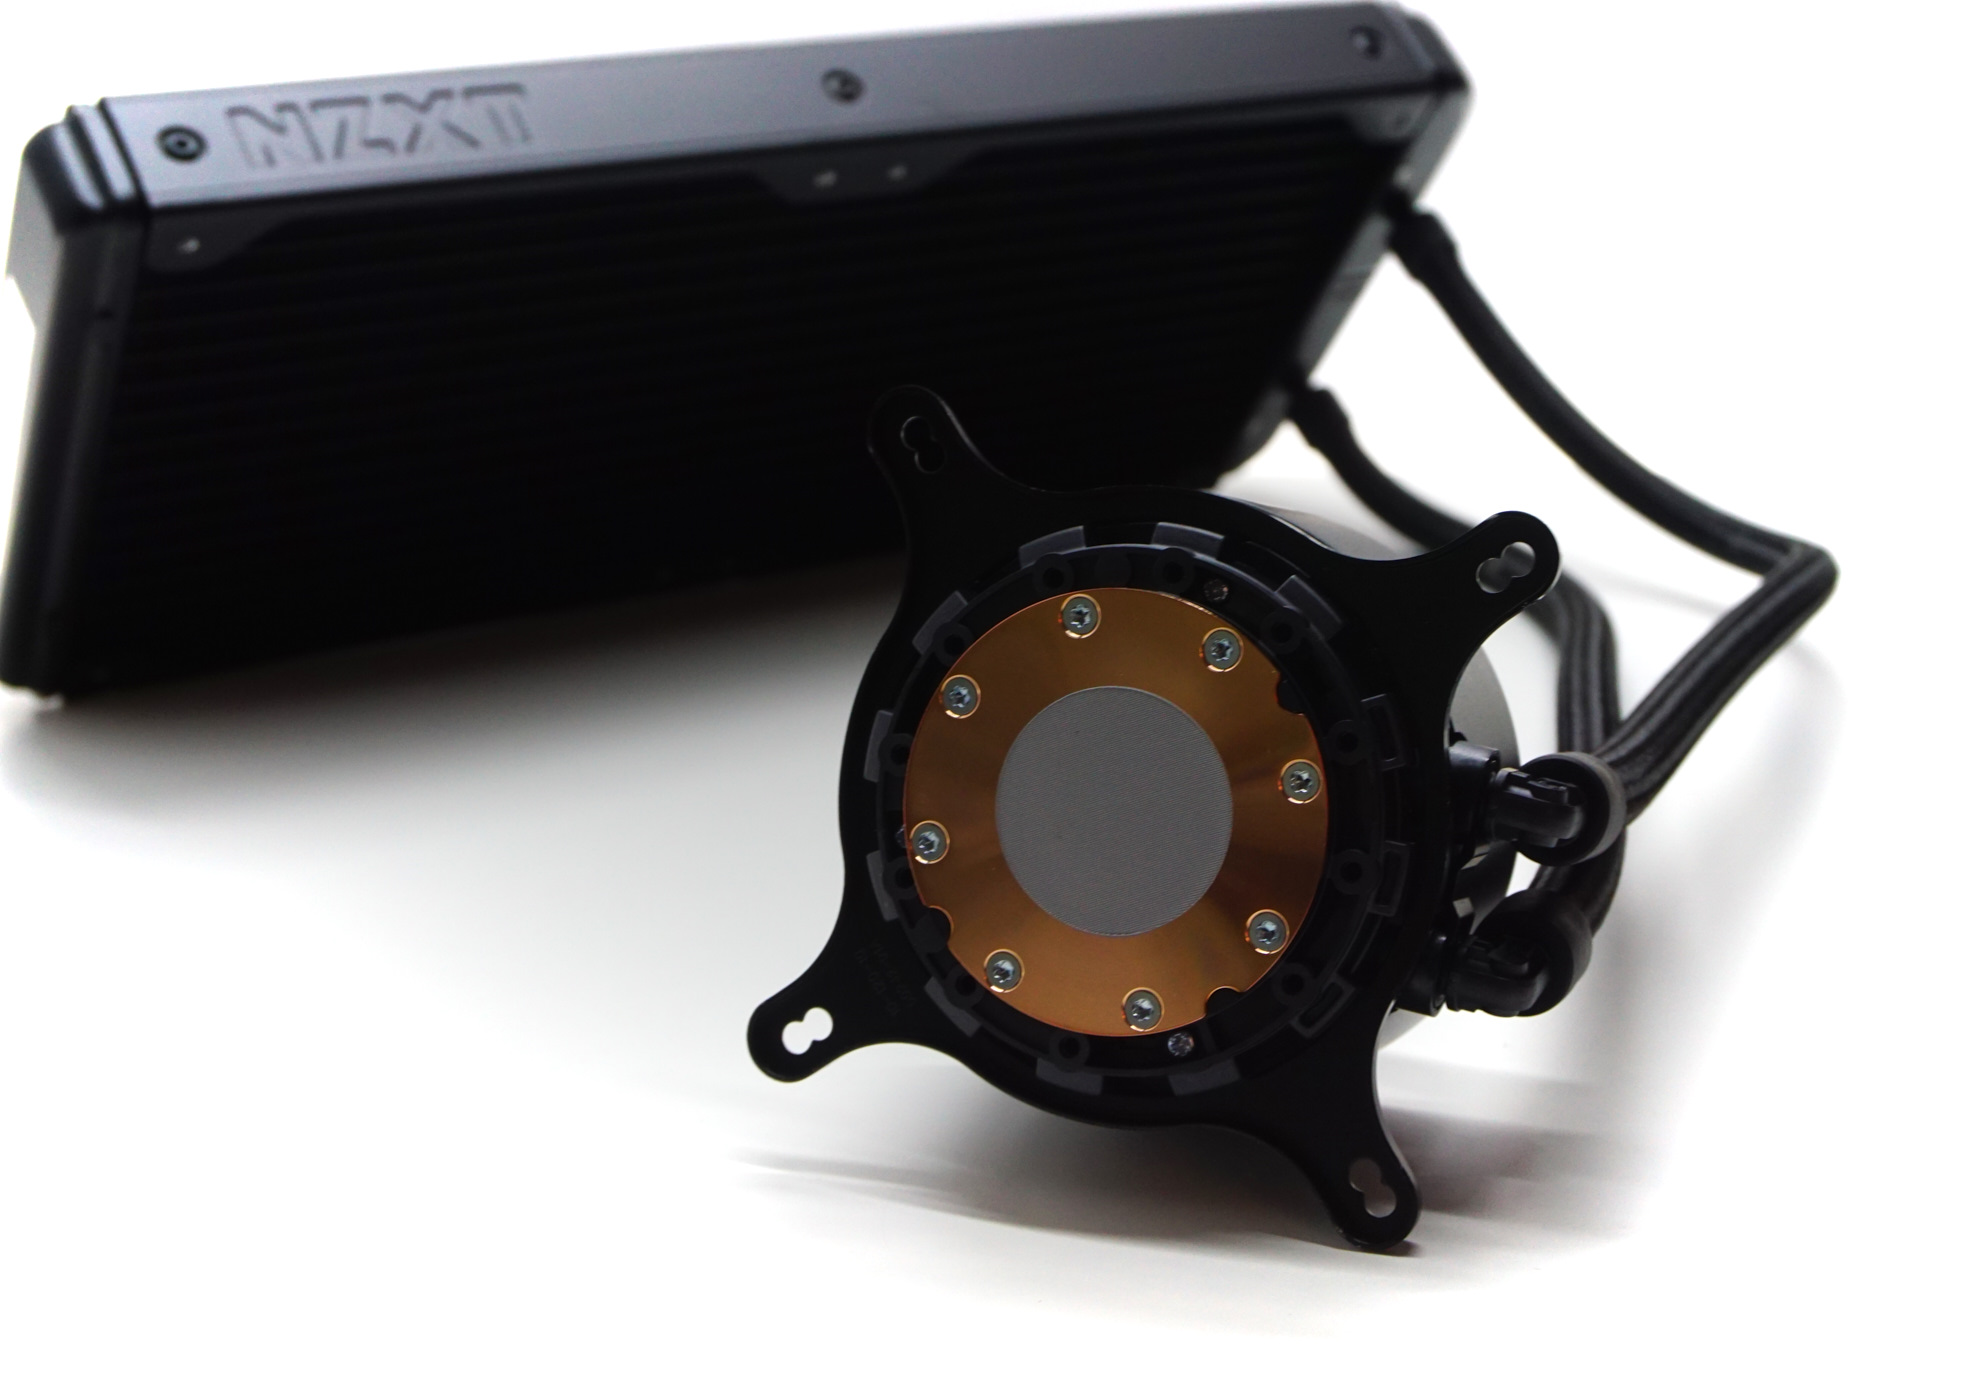 The Nzxt Kraken Z63 X73 Aio Cooler Review Shiny On Top Solid Underneath